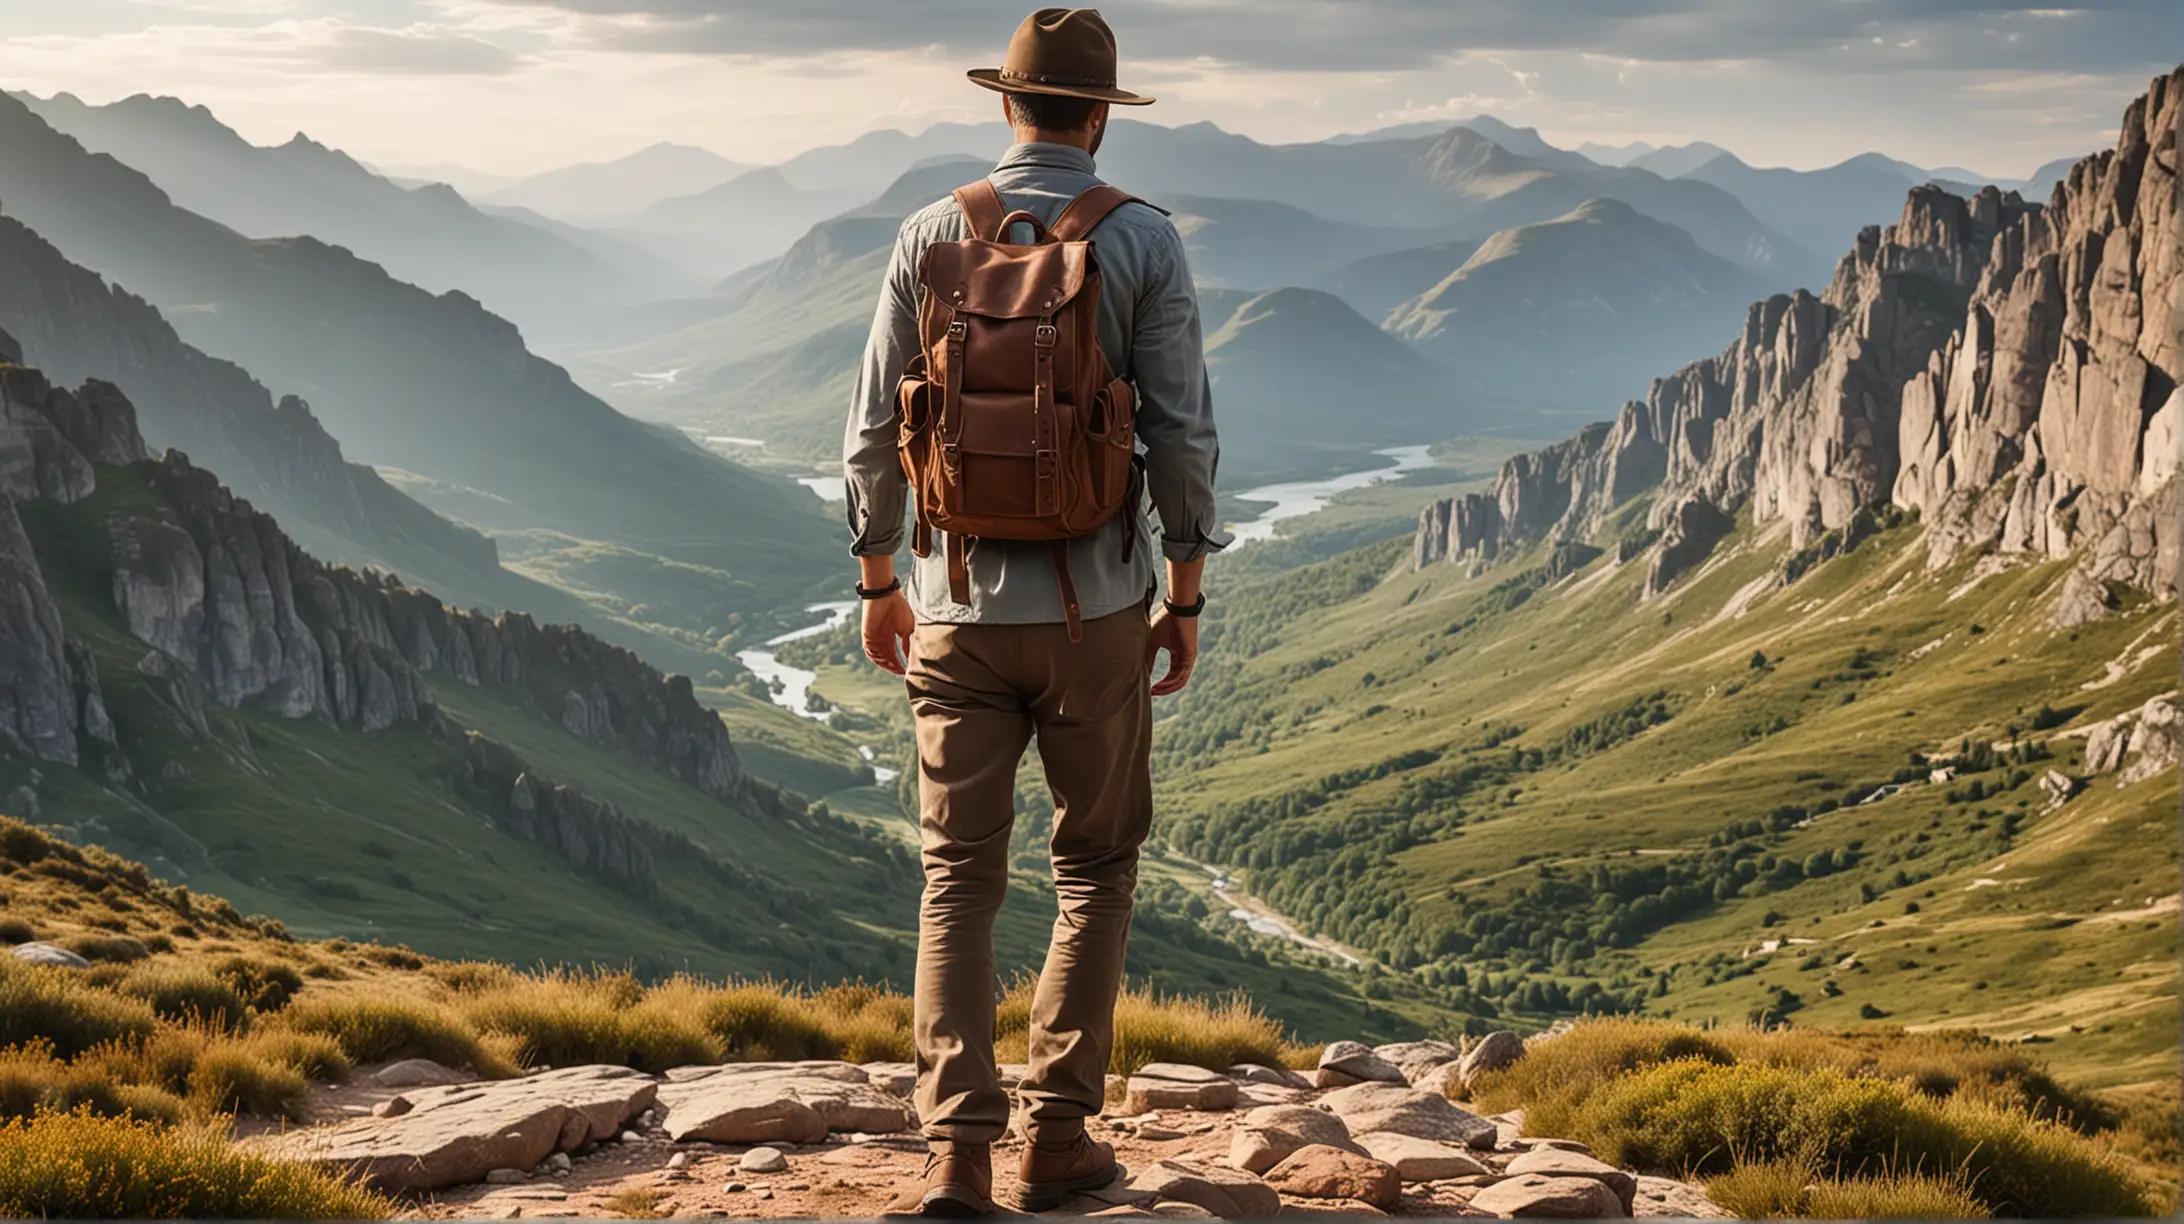 image of hiker with genuine leather belt, beautiful scenery